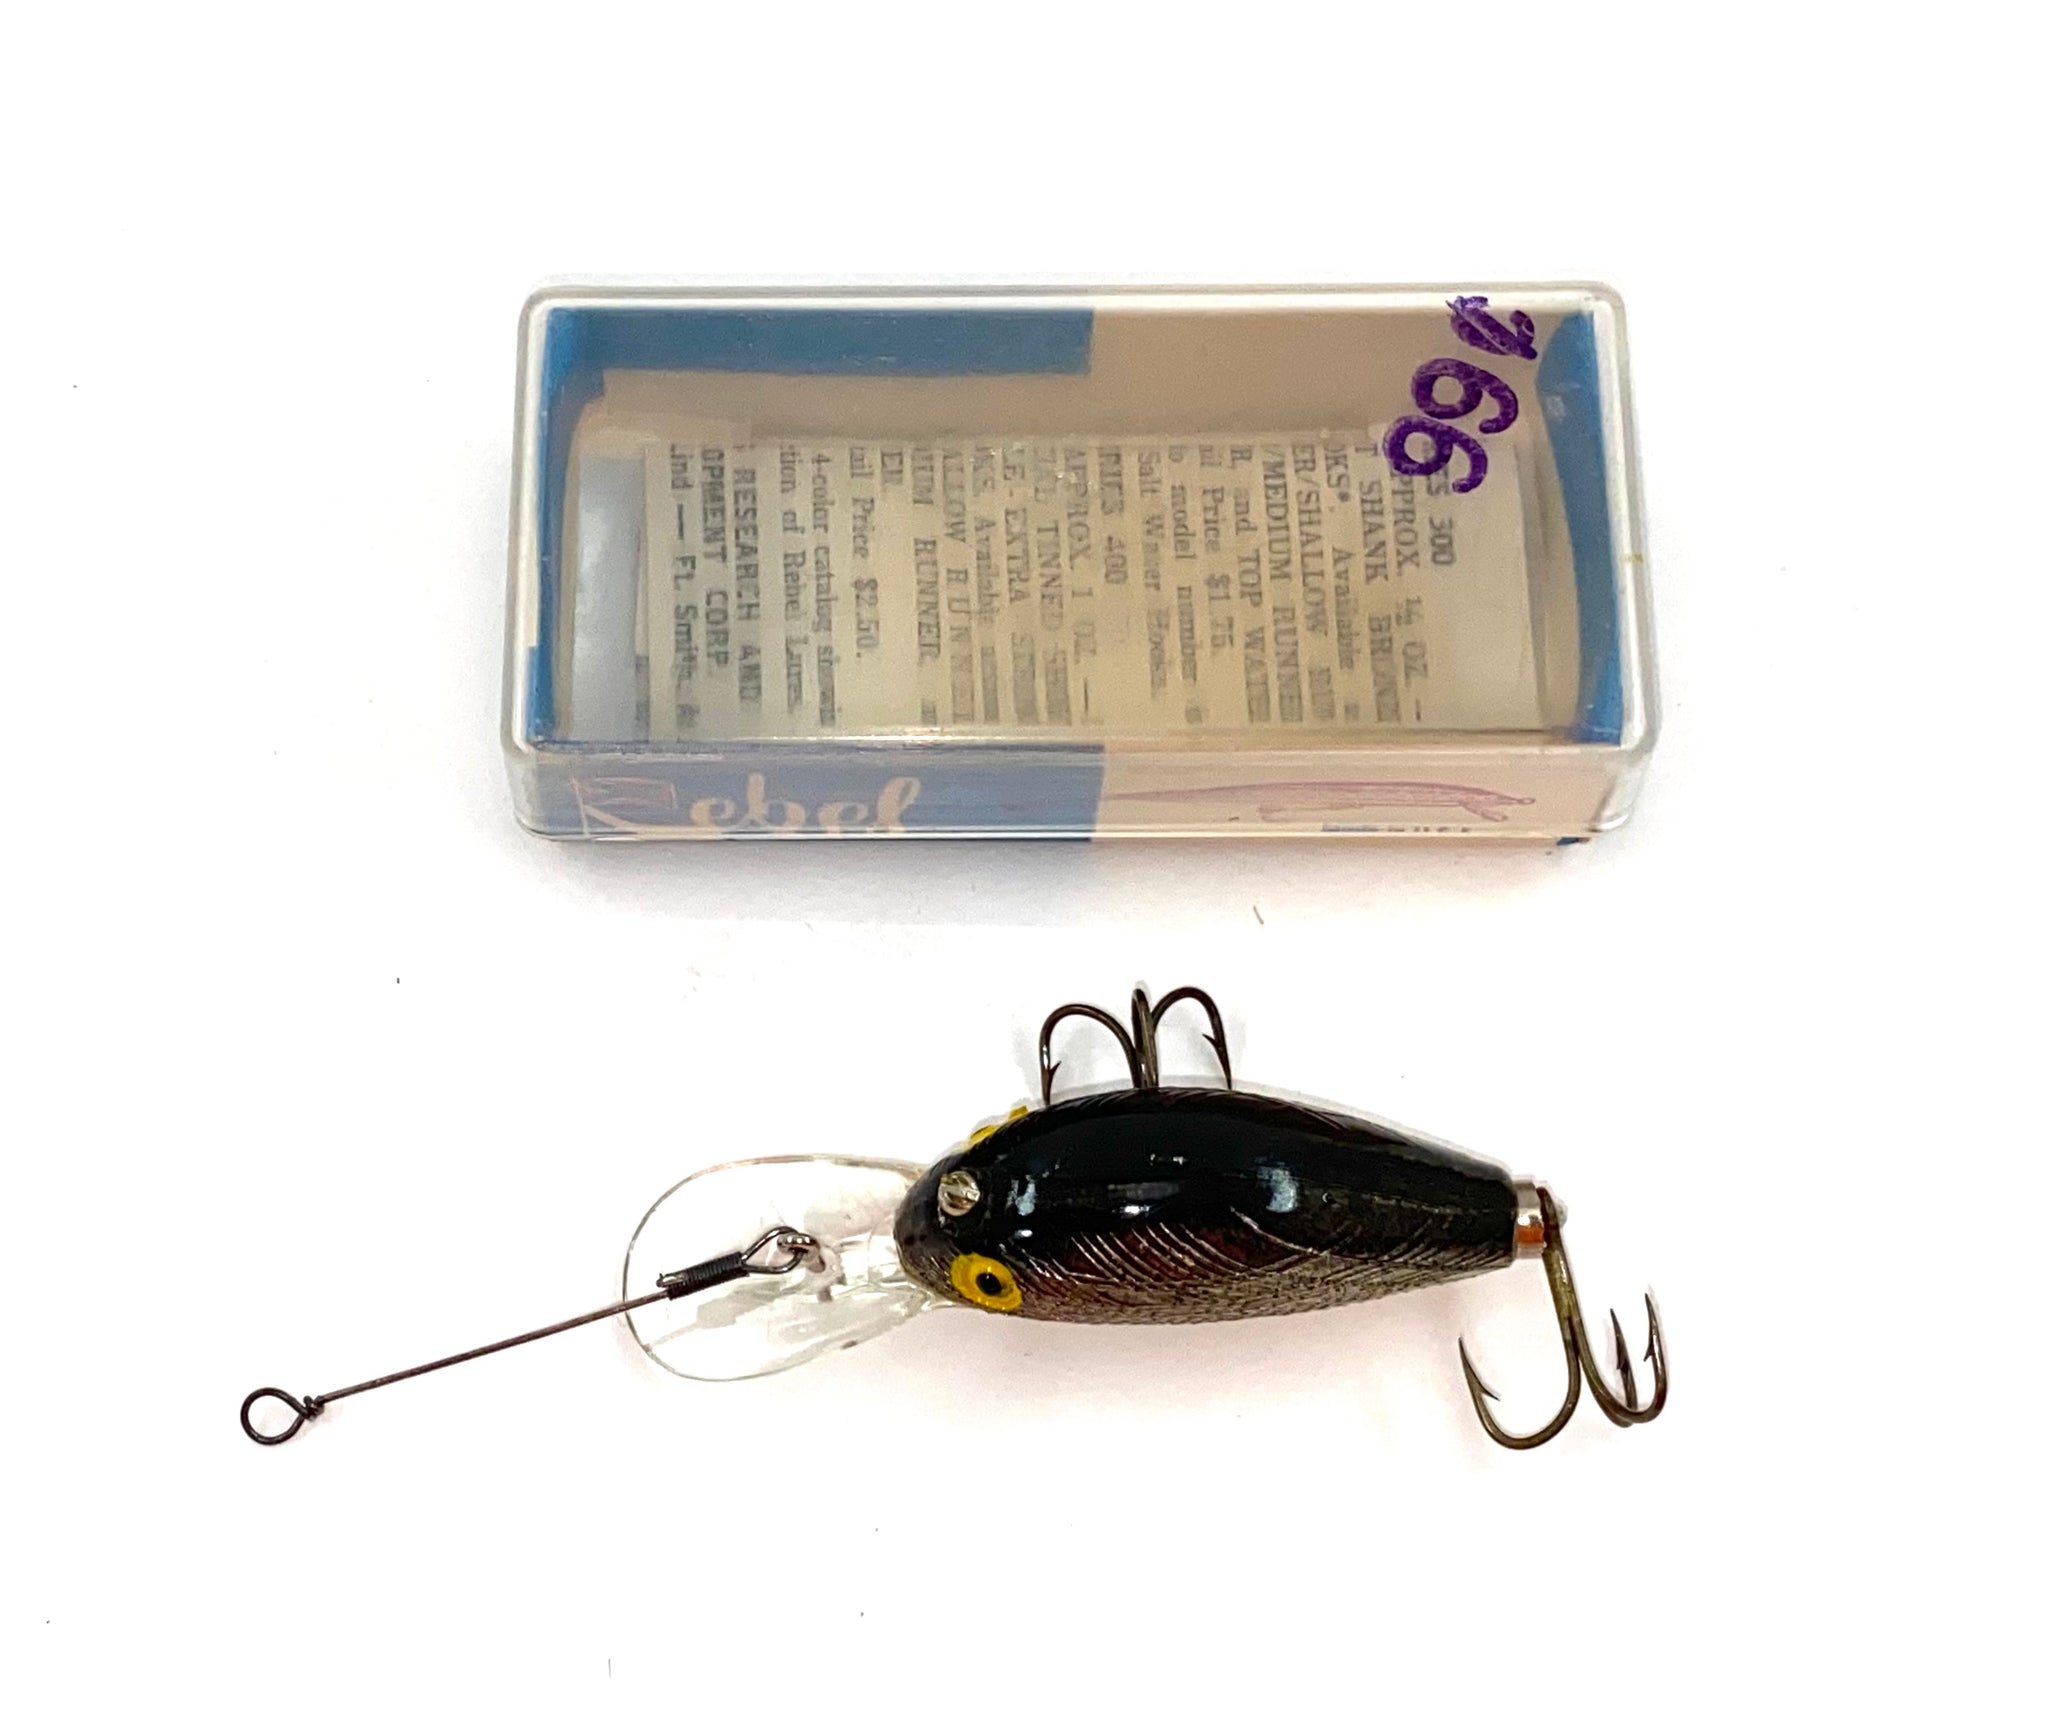 REBEL LURES DEEP WEE-R Fishing Lure • D9326 SILVER w/ YELLOW